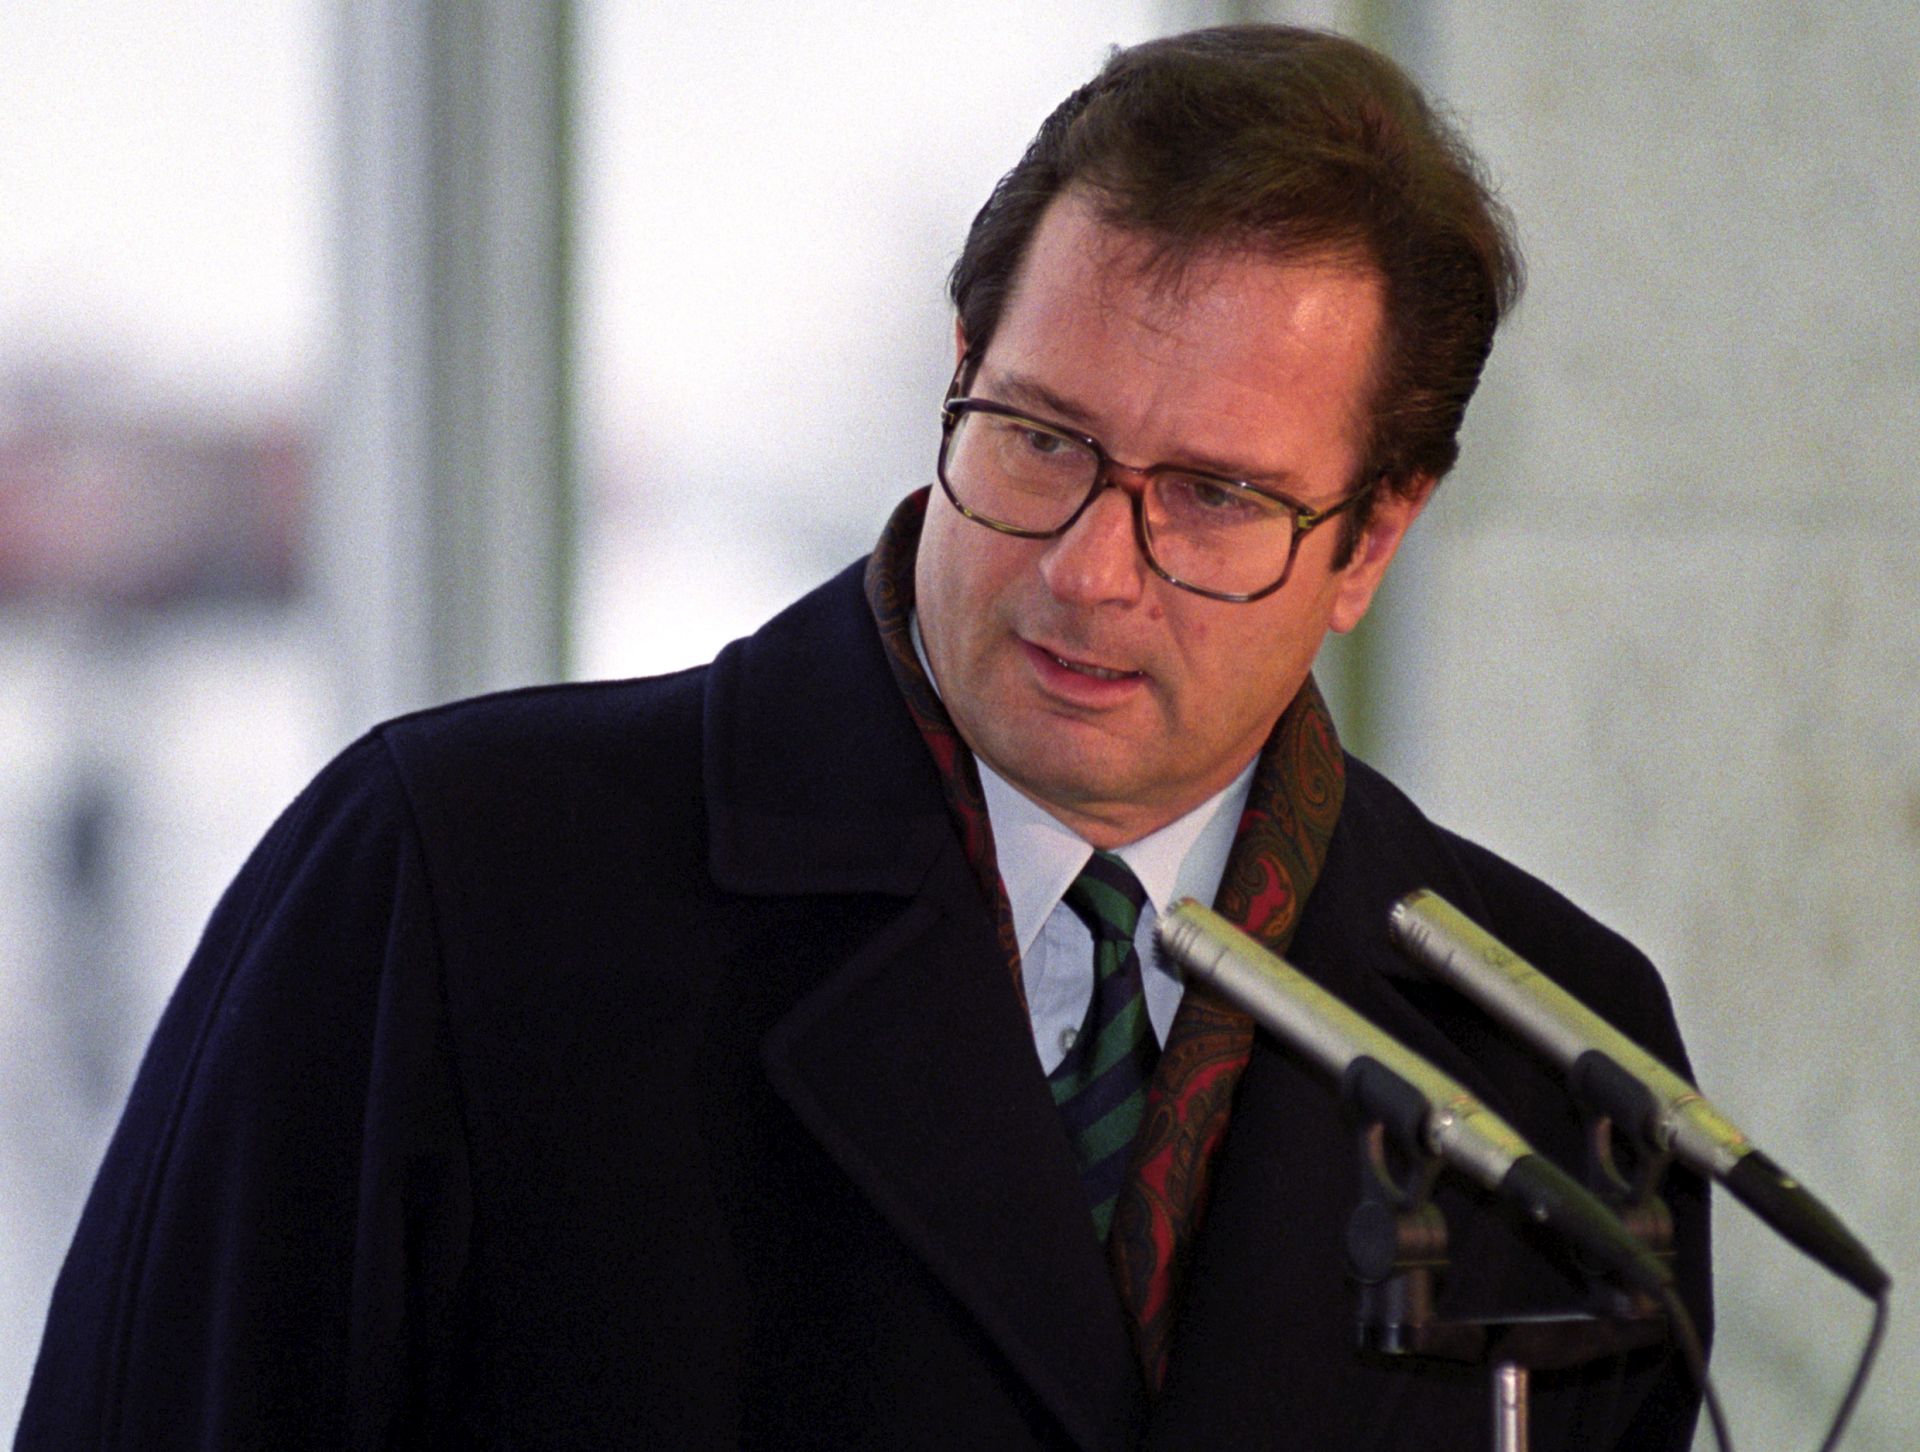 epa07414377 (FILE) - German Foreign Minister Klaus Kinkel speaks during the press conference in Moscow airport upon his arrival in Russia, 11 December 1993 (reissued 05 March 2019). Reports on 05 March 2019 state former German Foreign Minister Klaus Kinkel has died, aged 82. Kinkel was German foreign minister from 1992 to 1998 and between the years 1993 and 1995 German liberal party FDP chairman.  EPA/MLADEN ANTONOV